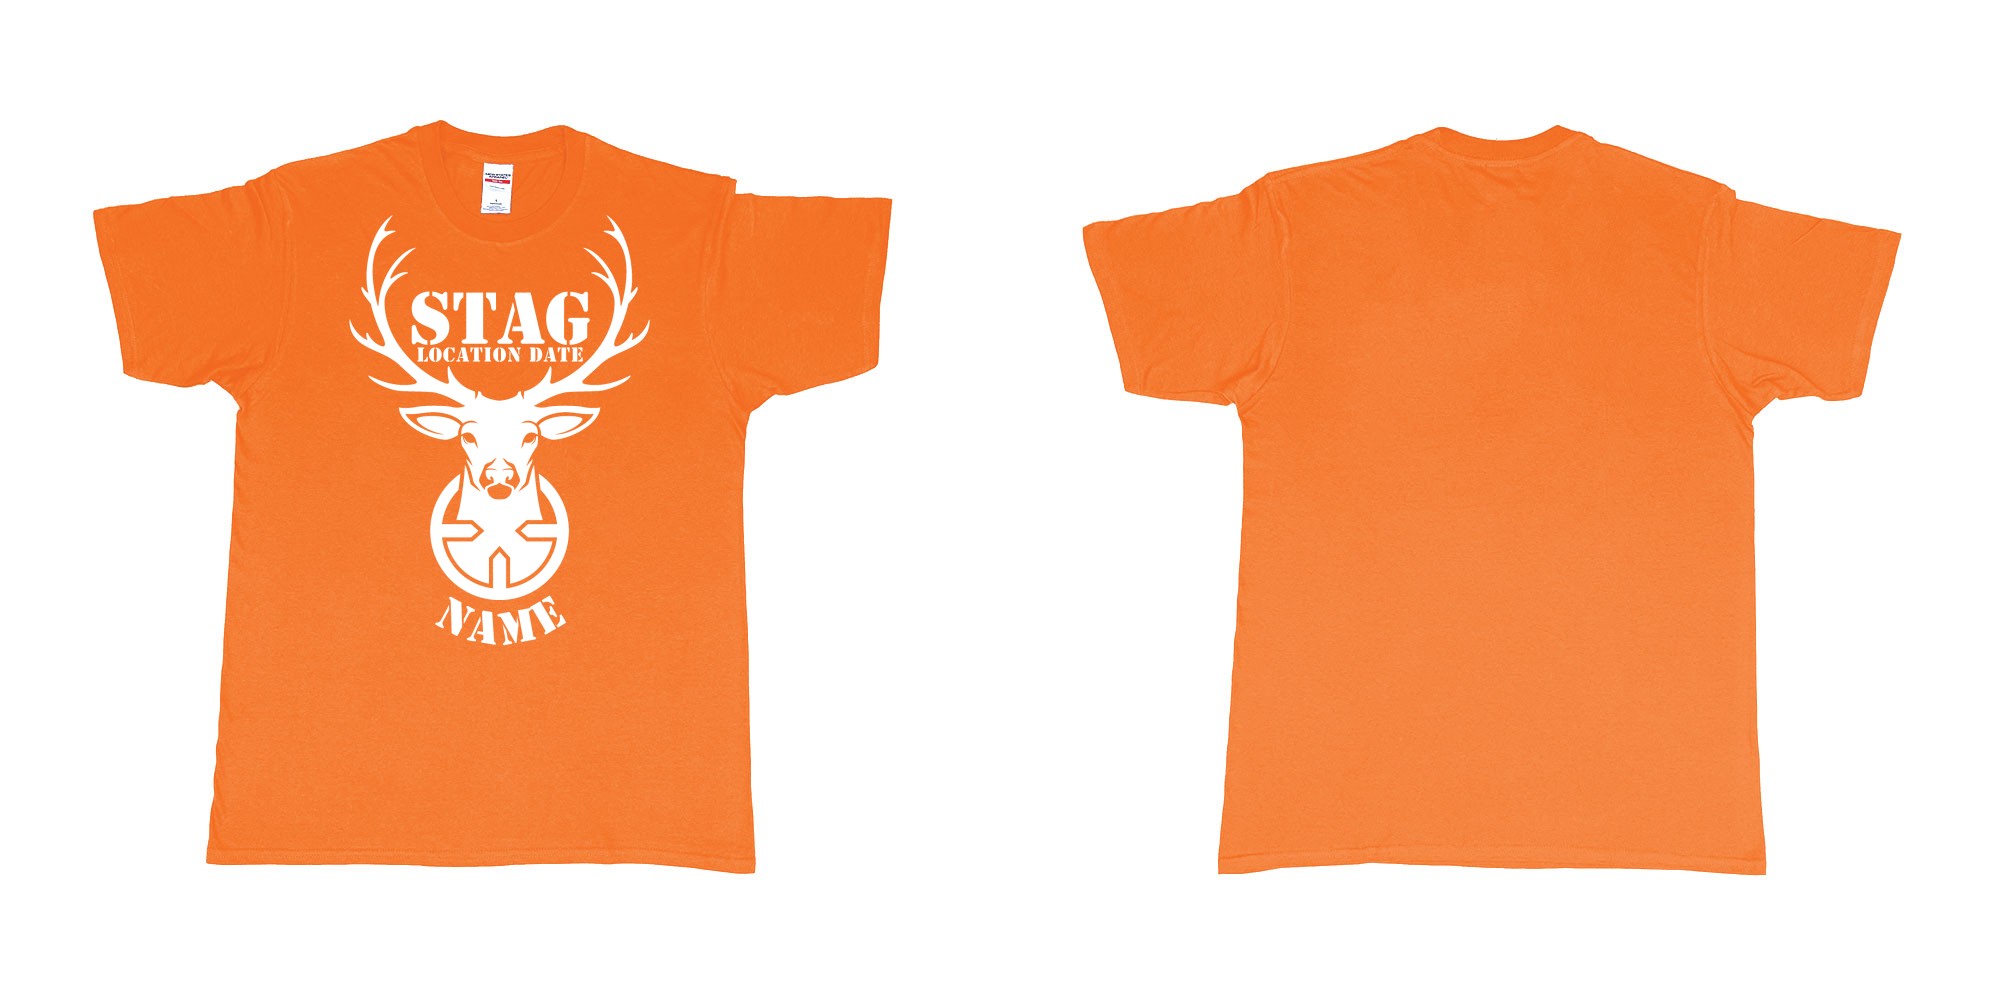 Custom tshirt design aiming for a stag custom tshirt print in fabric color orange choice your own text made in Bali by The Pirate Way